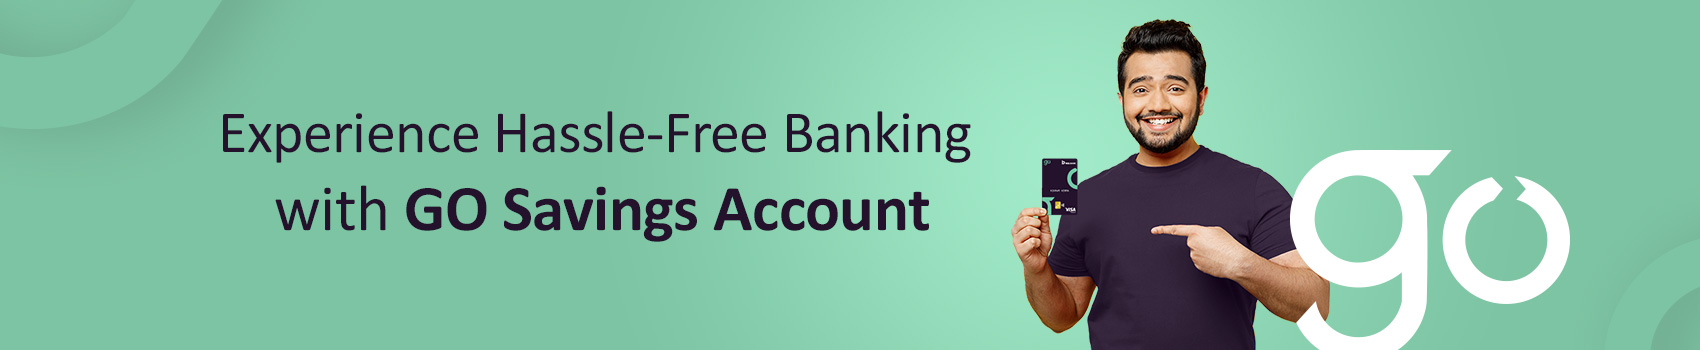 Step-by-Step Guide to Open RBL Bank’s GO Savings Account